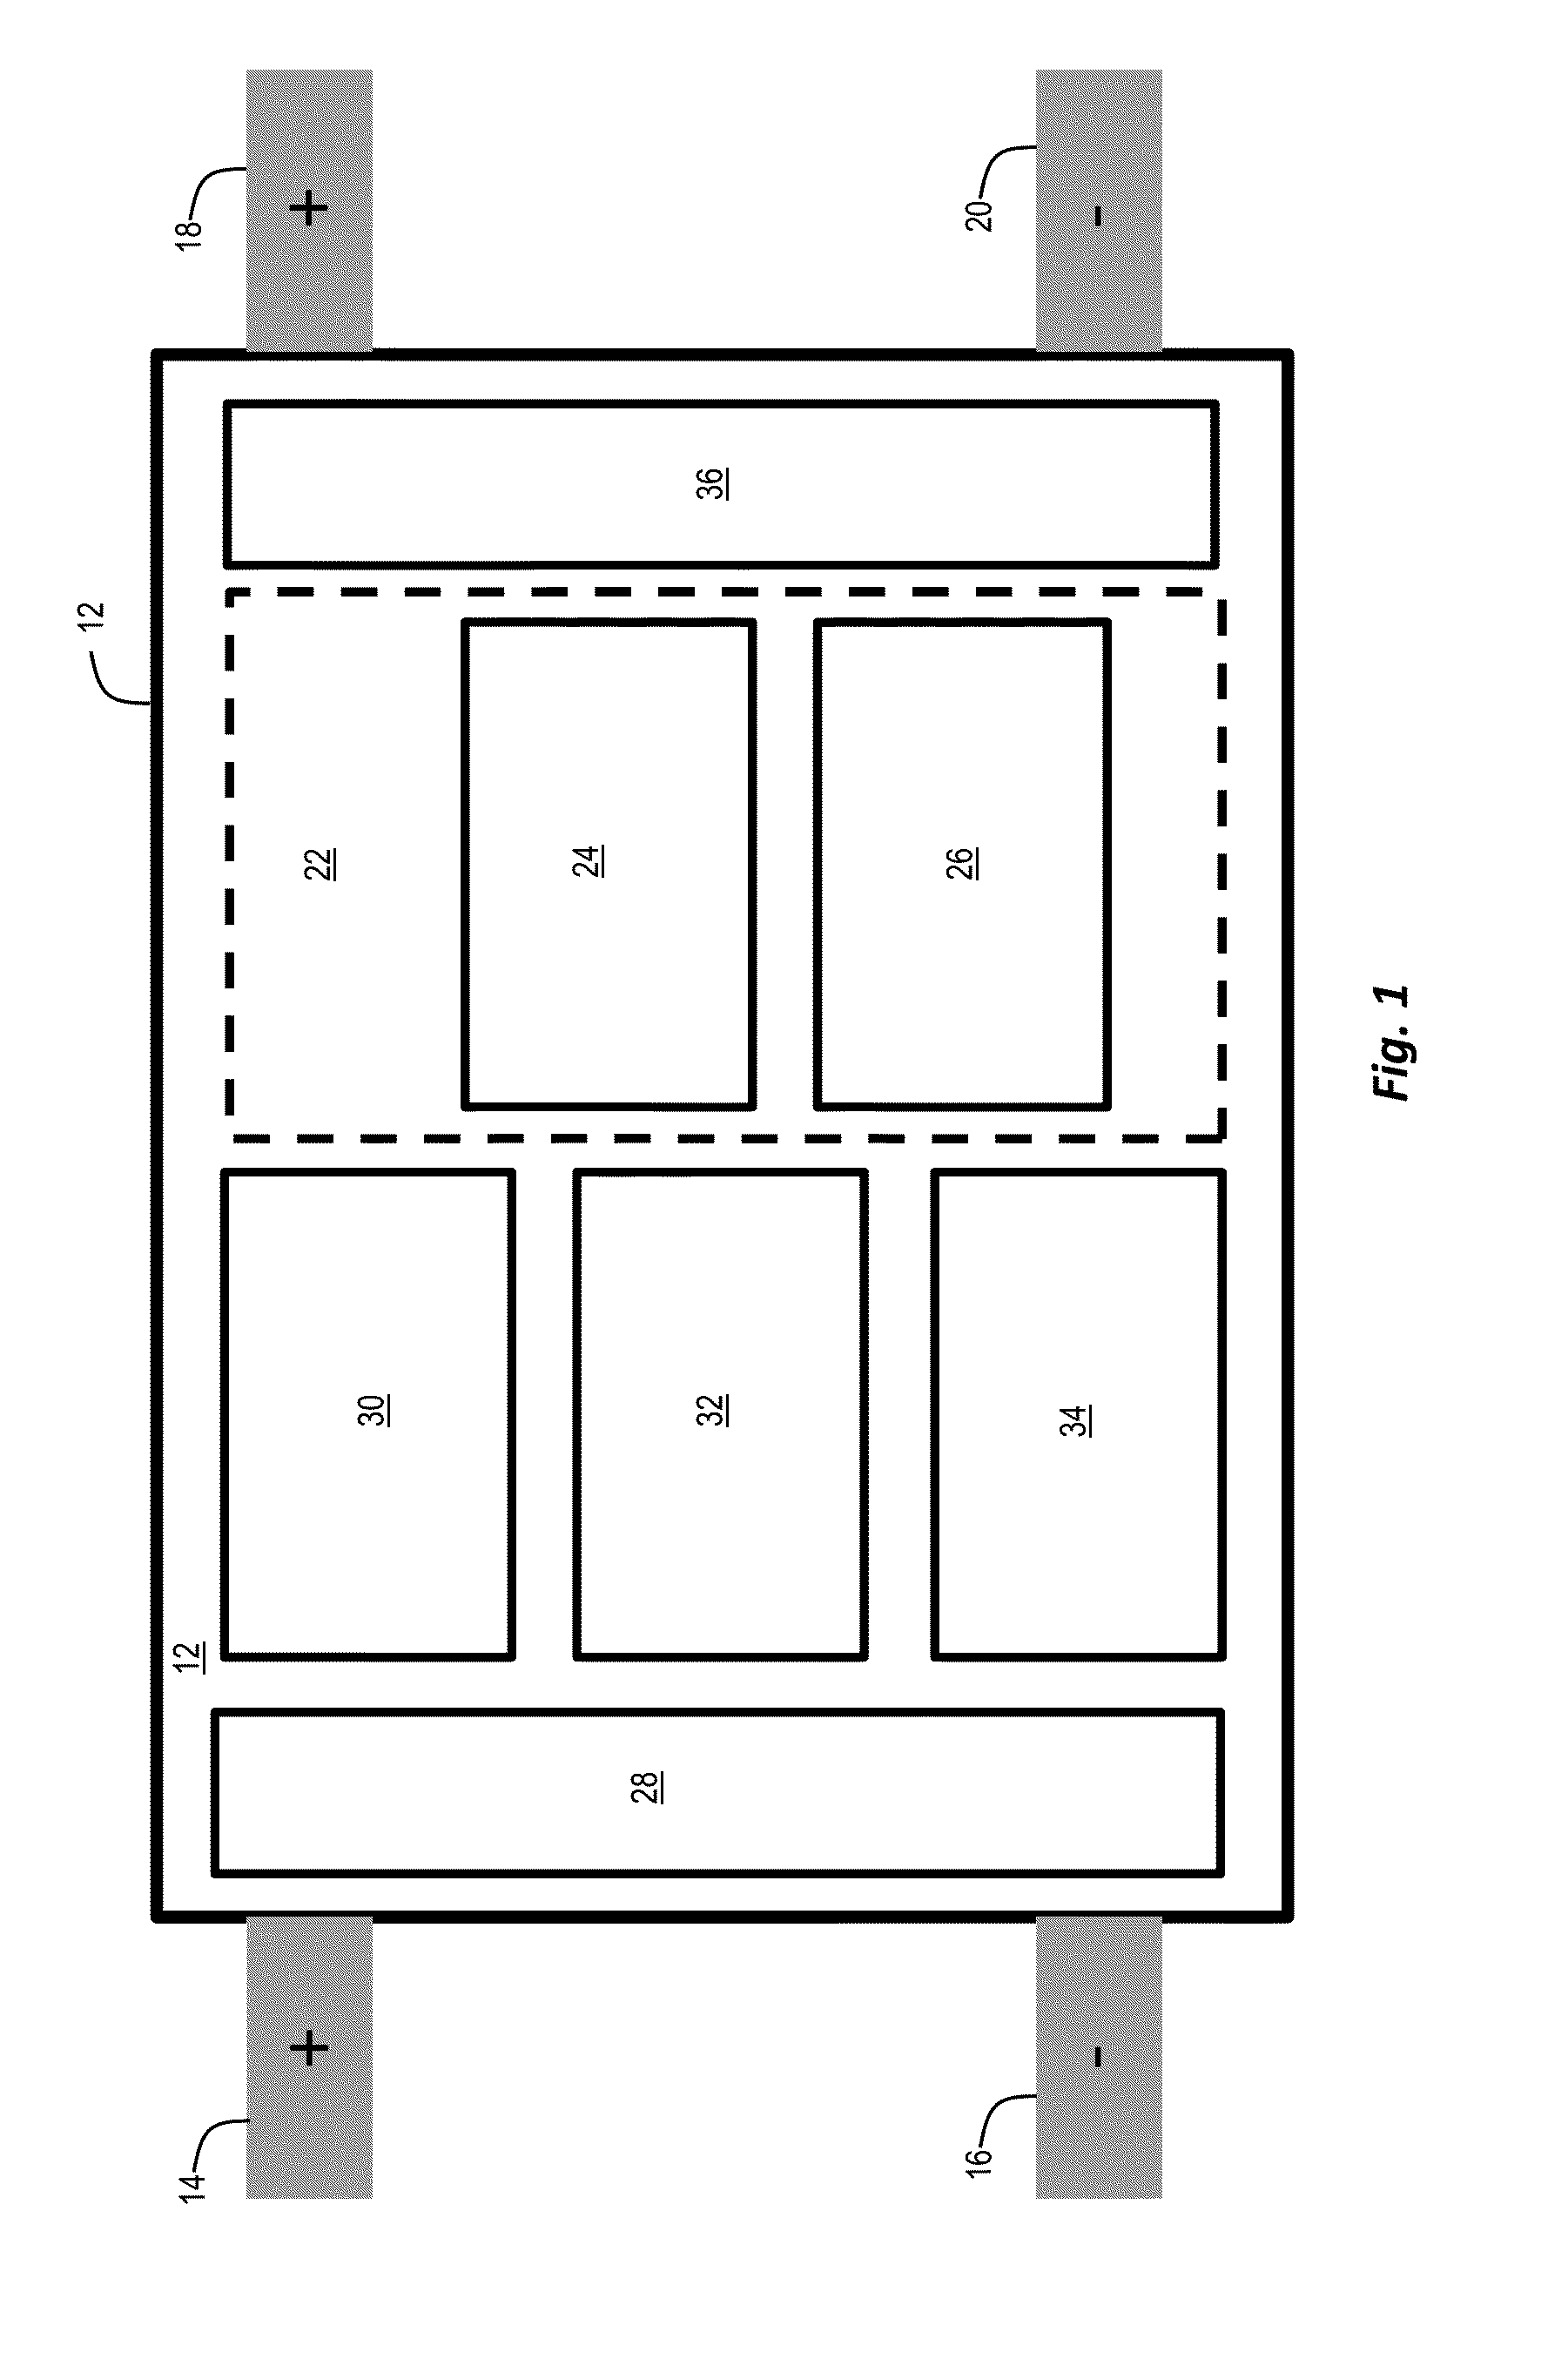 Solar photovoltaic module power control and status monitoring system utilizing laminate-embedded remote access module switch